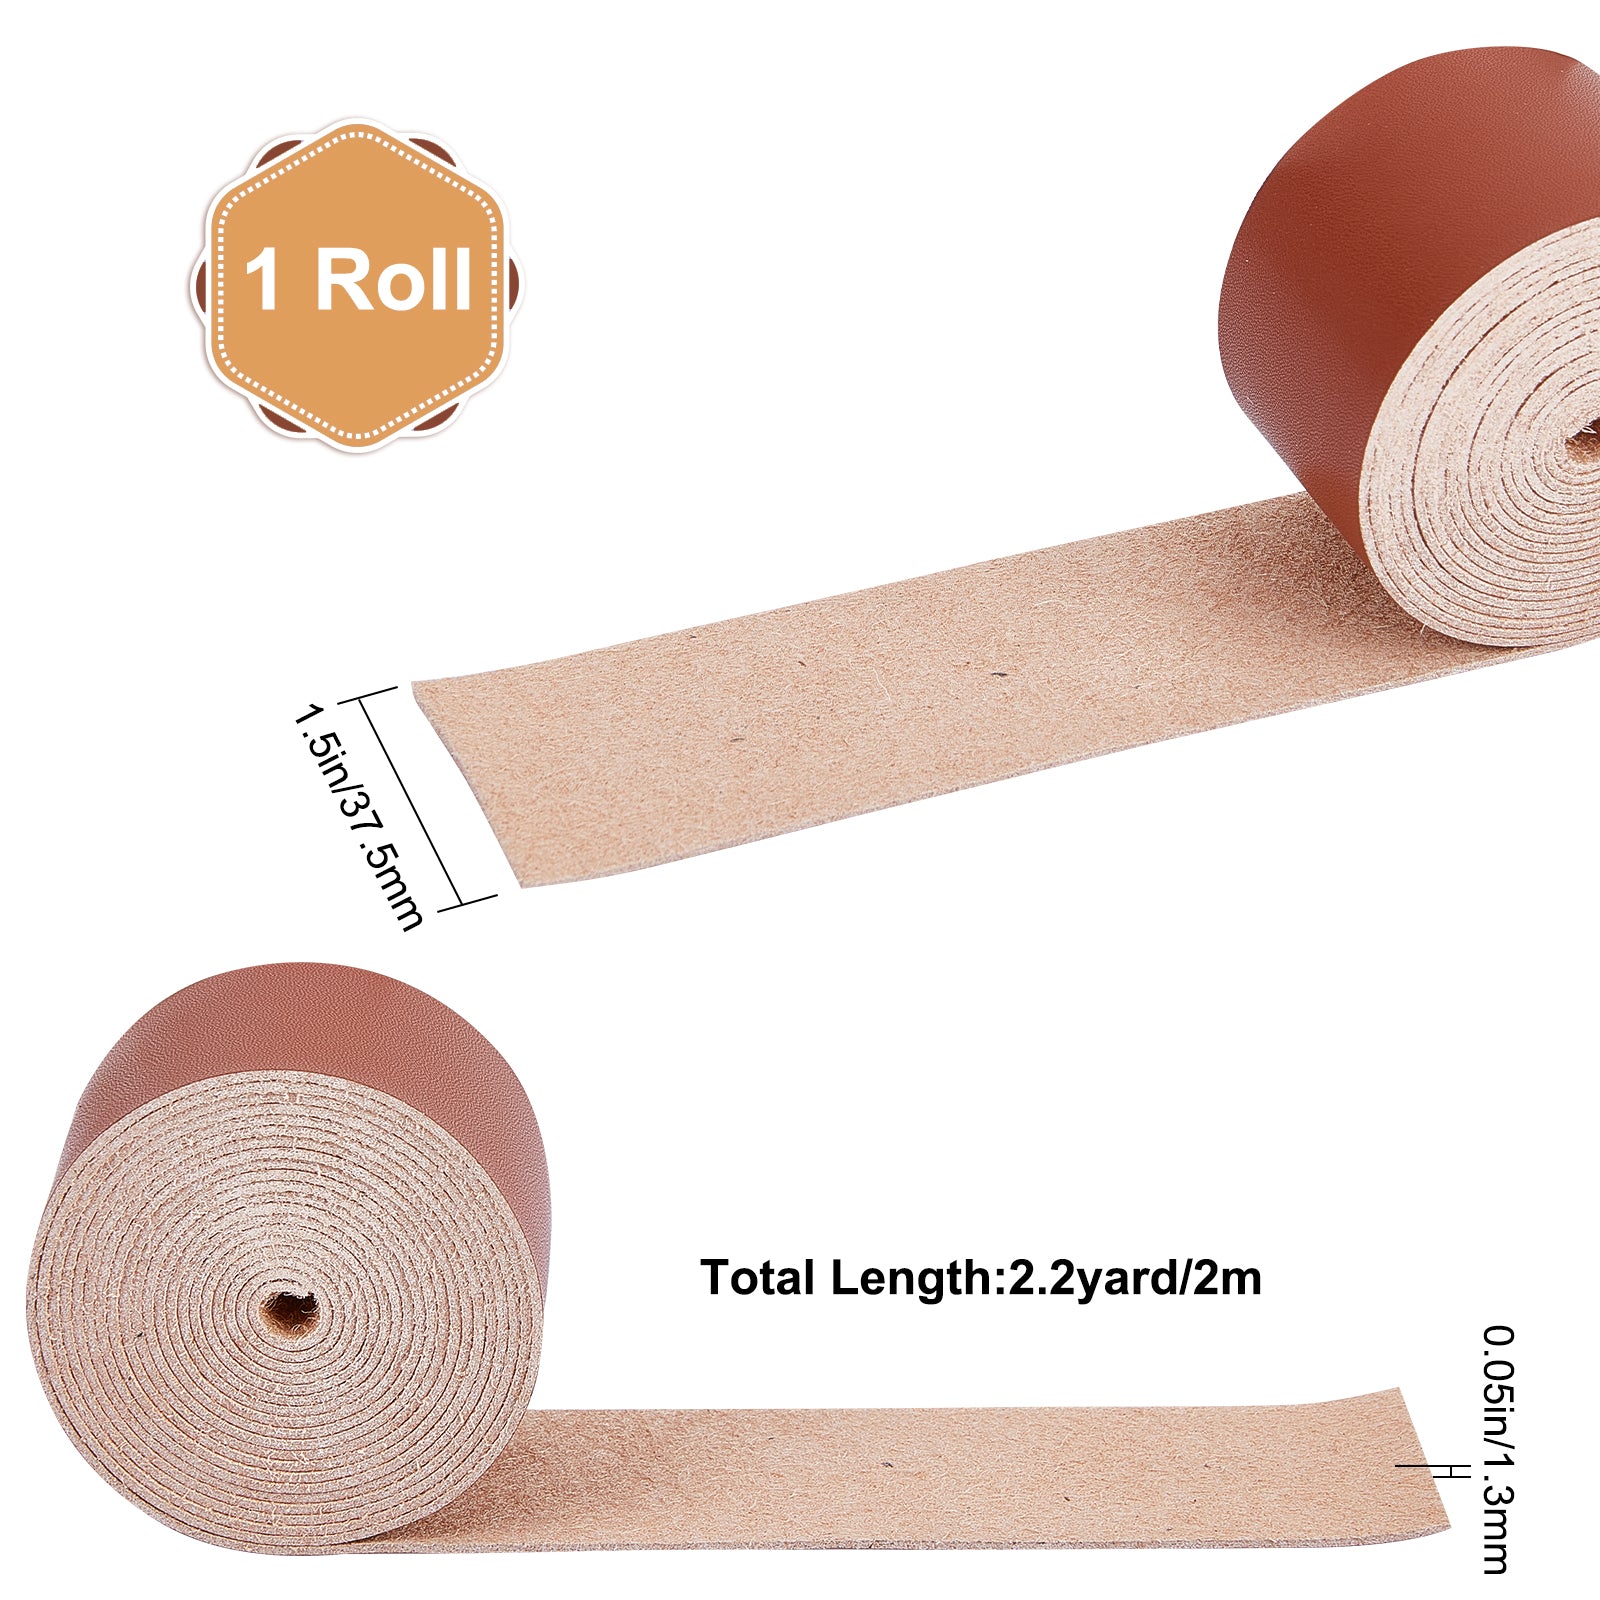 1 5MM THICKNESS 2m Long Leather Craft Strap for DIY Crafts and